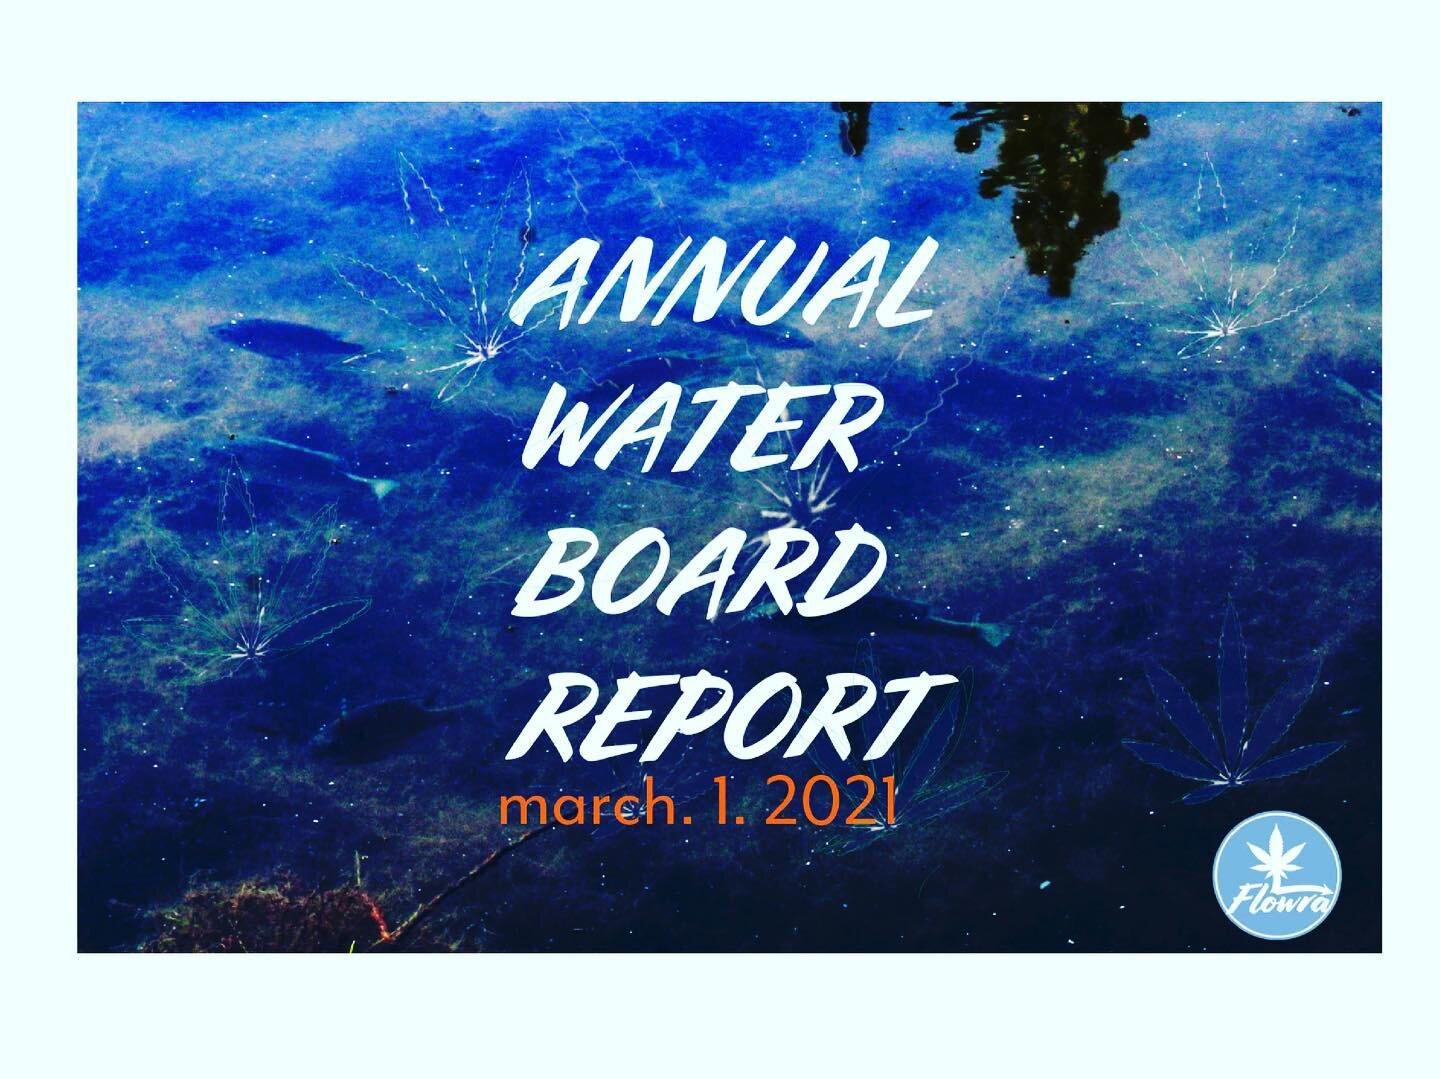 Cultivators it&rsquo;s that misty-water-color-memories-time of the year again! The State Water Resources Control Board Annual Monitoring Report is due March 1. Grow with the Flow and let us do it for you. Connect with us&mdash;details in bio. #cannab